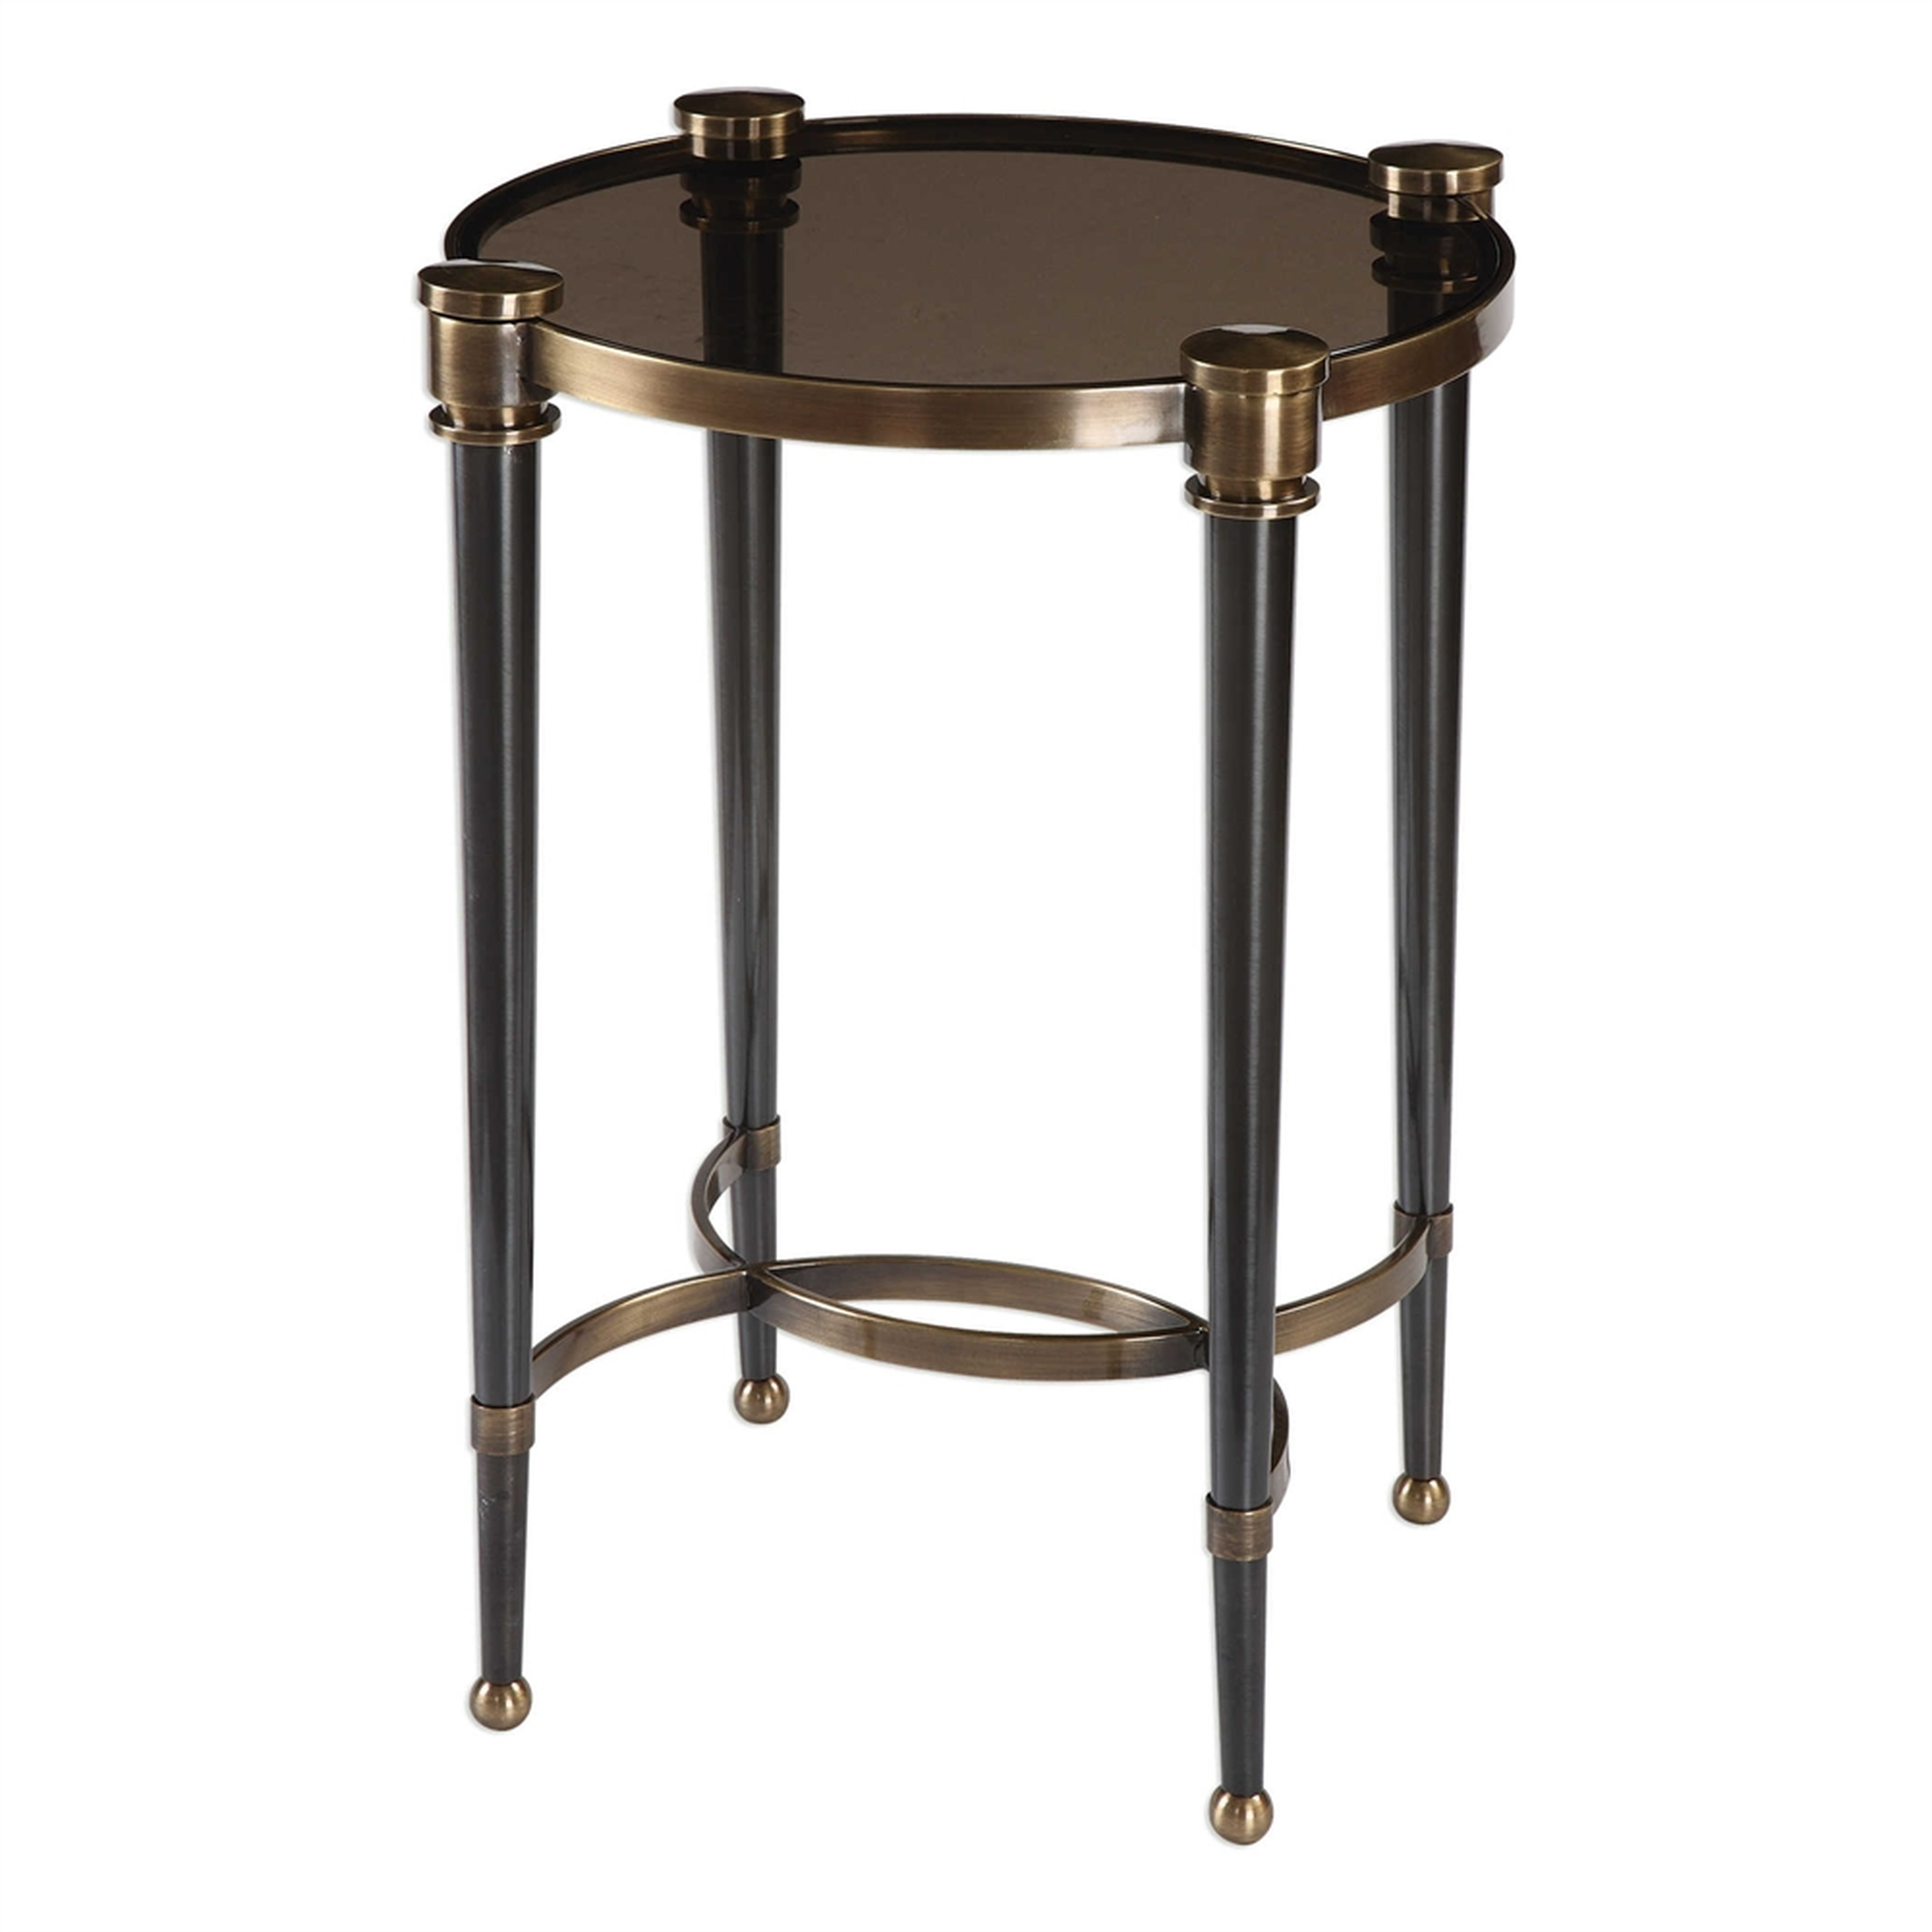 Thora Accent Table - Hudsonhill Foundry